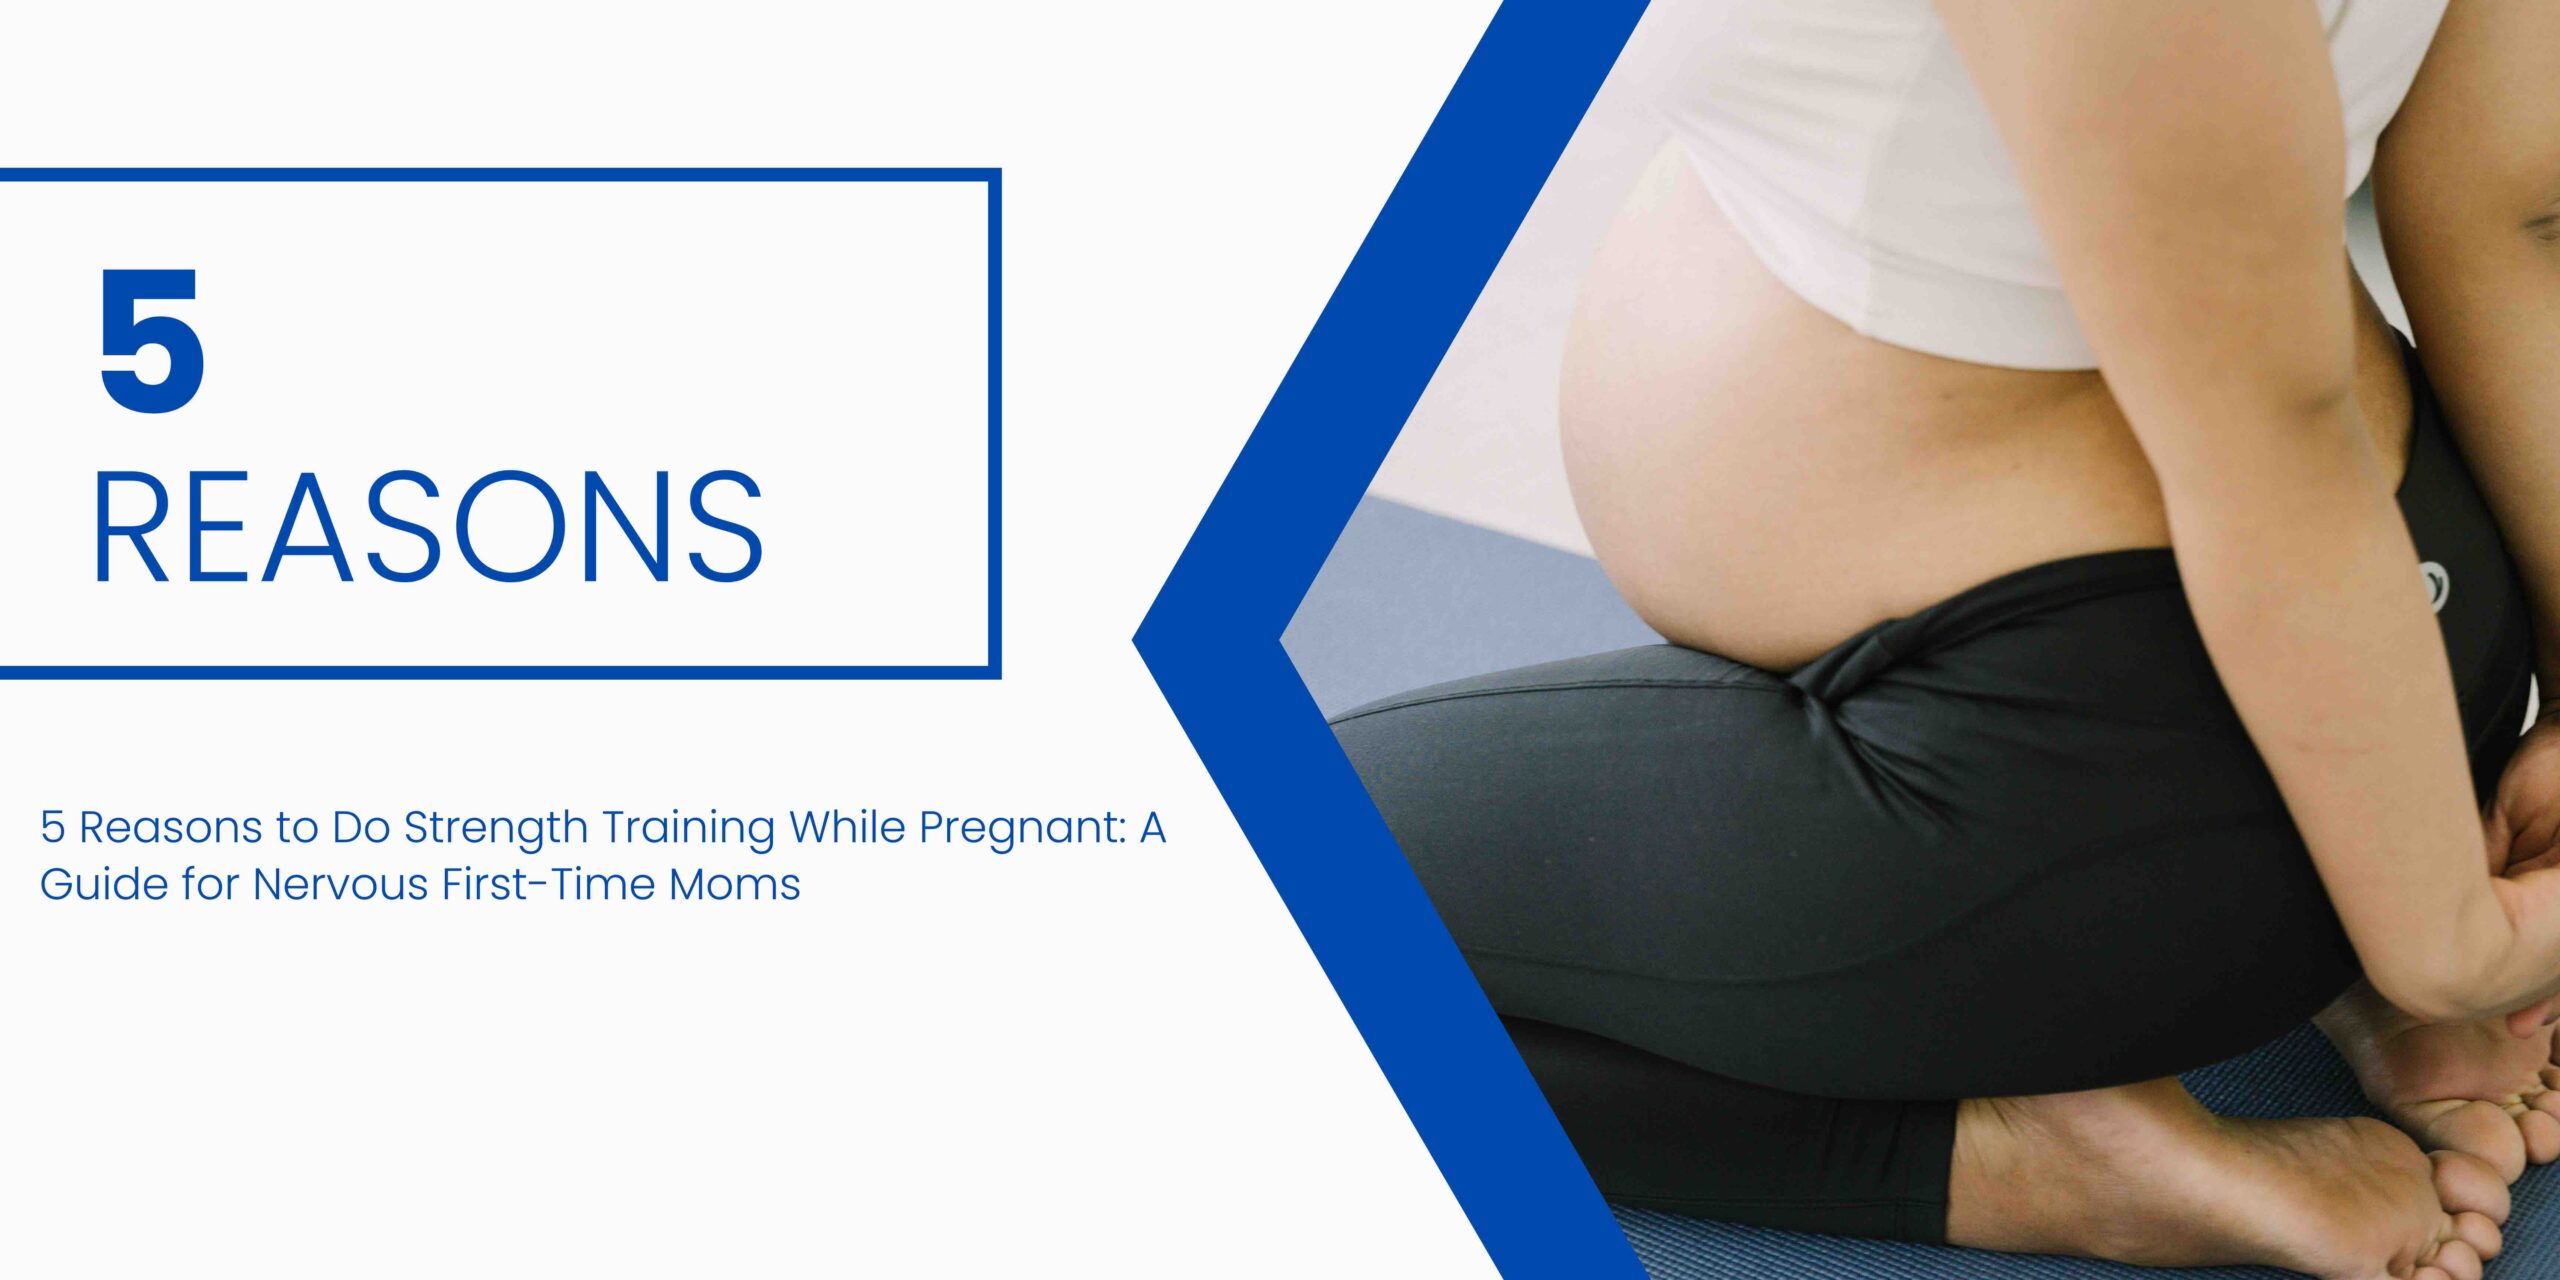 5 Reasons to Do Strength Training While Pregnant: A Guide for Nervous First-Time Moms